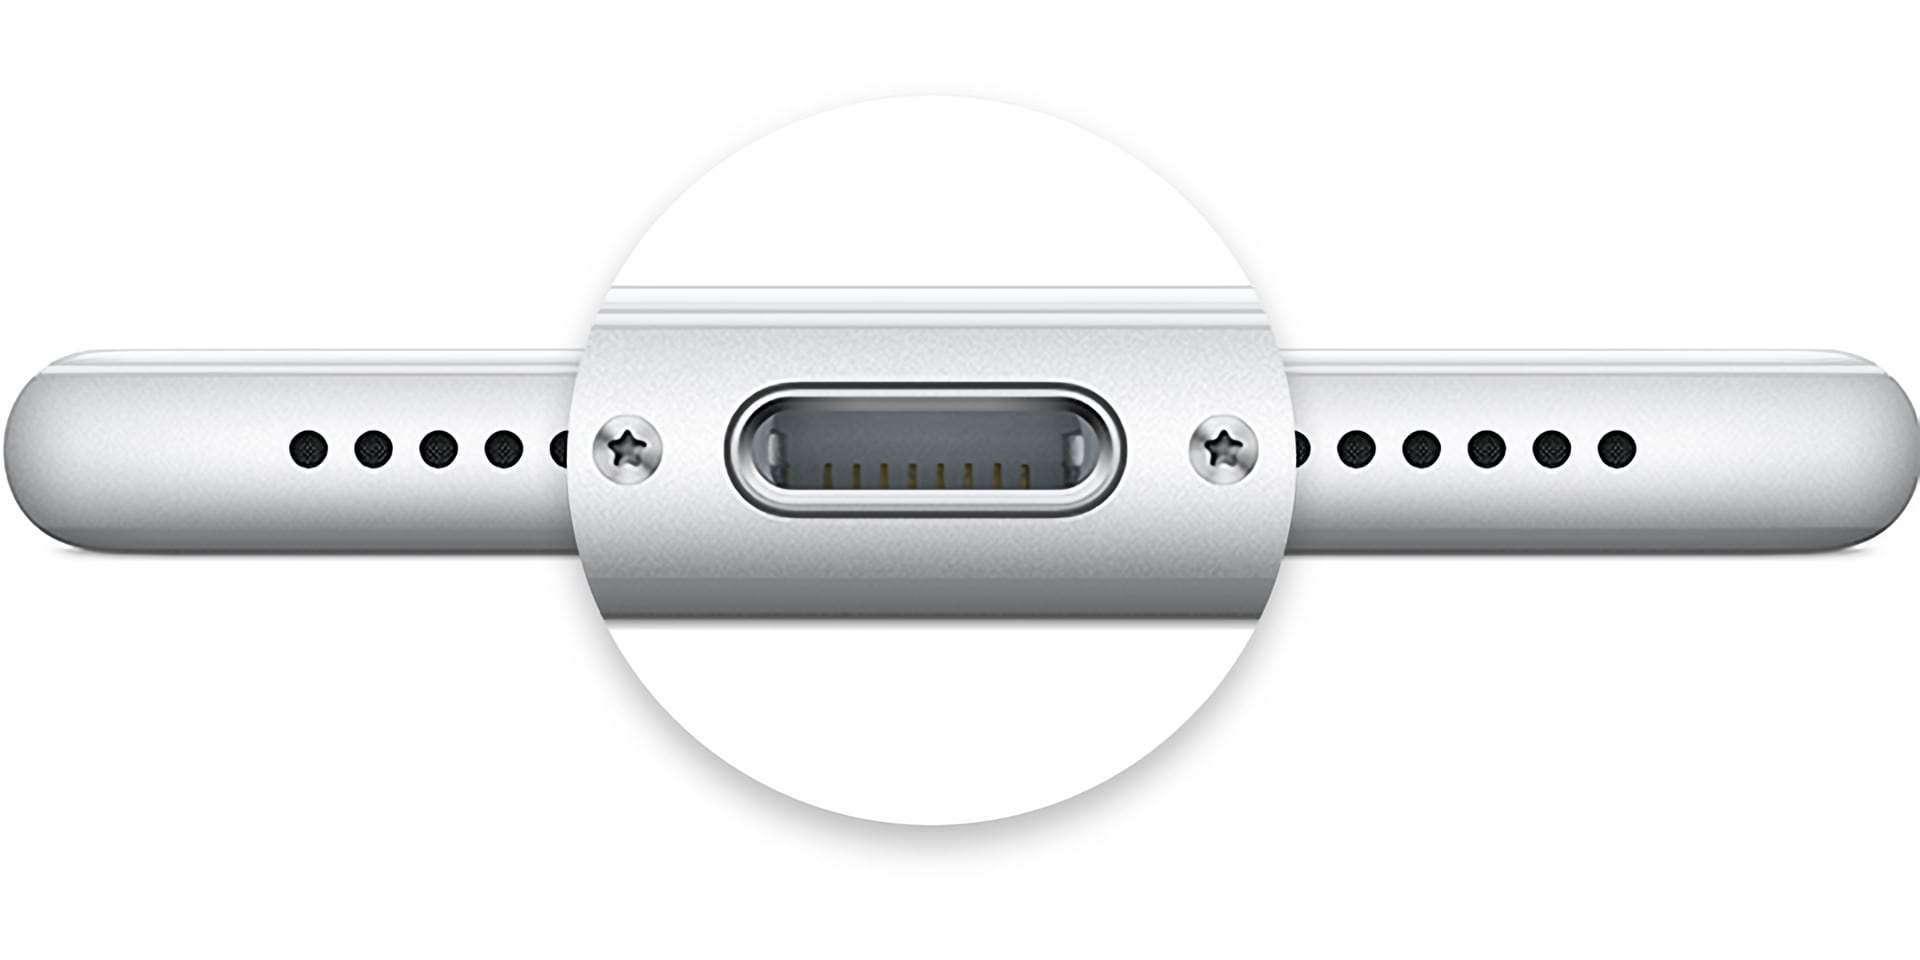 Lightning ports are found on iPhones, from the iPhone 5 in 2012 to the iPhone 14 lineup in 2022. They're also found on the charging cases for AirPods (apart from the AirPods Pro introduced in 2023), some wireless keyboards and mice for Macs, and some Beats headphones and earphones.